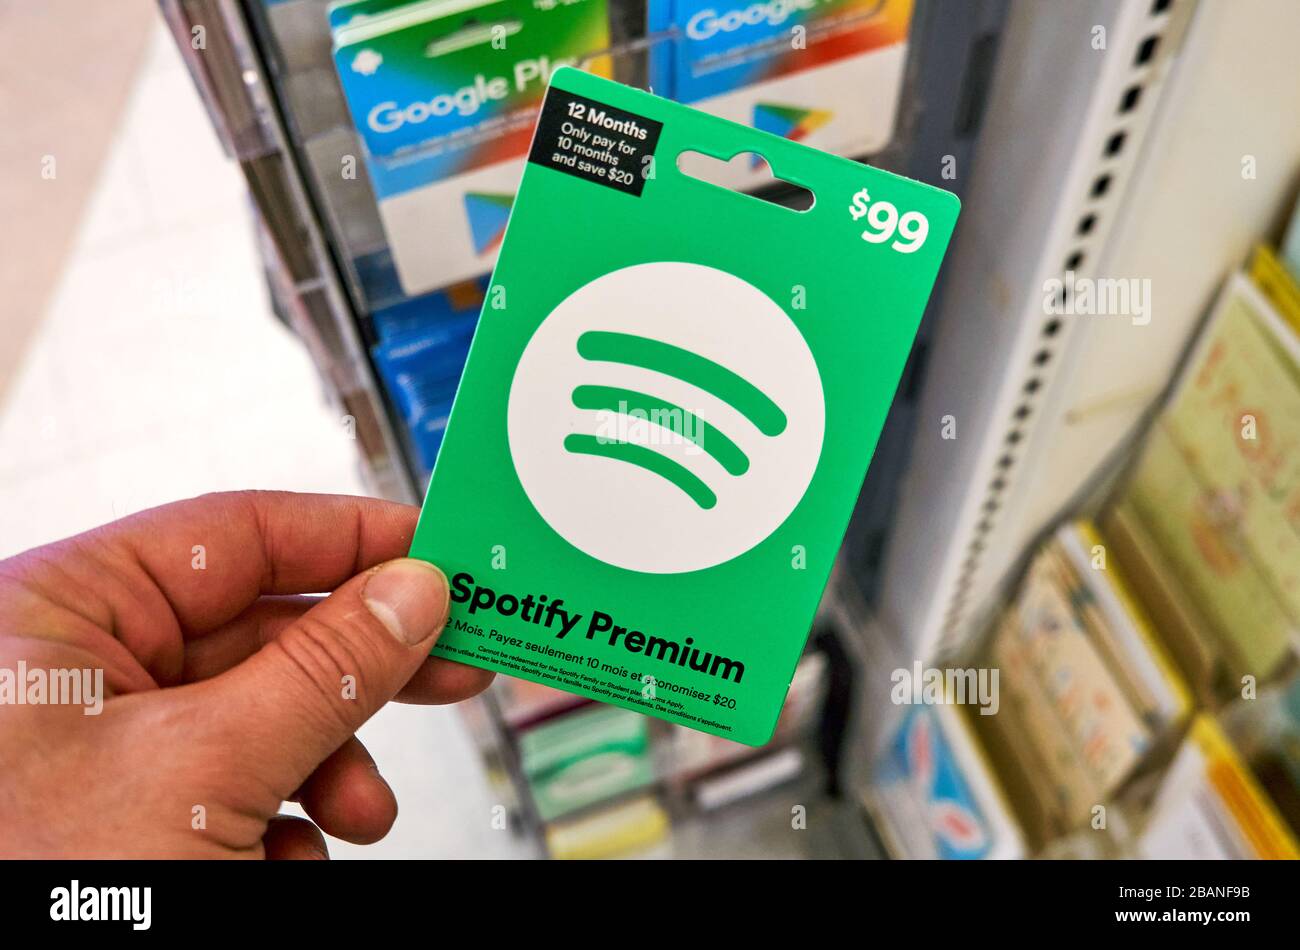 https://c8.alamy.com/comp/2BANF9B/montreal-canada-march-24-2020-spotify-green-gift-card-in-a-hand-at-store-over-gift-cards-spotify-is-an-international-media-services-provider-we-2BANF9B.jpg